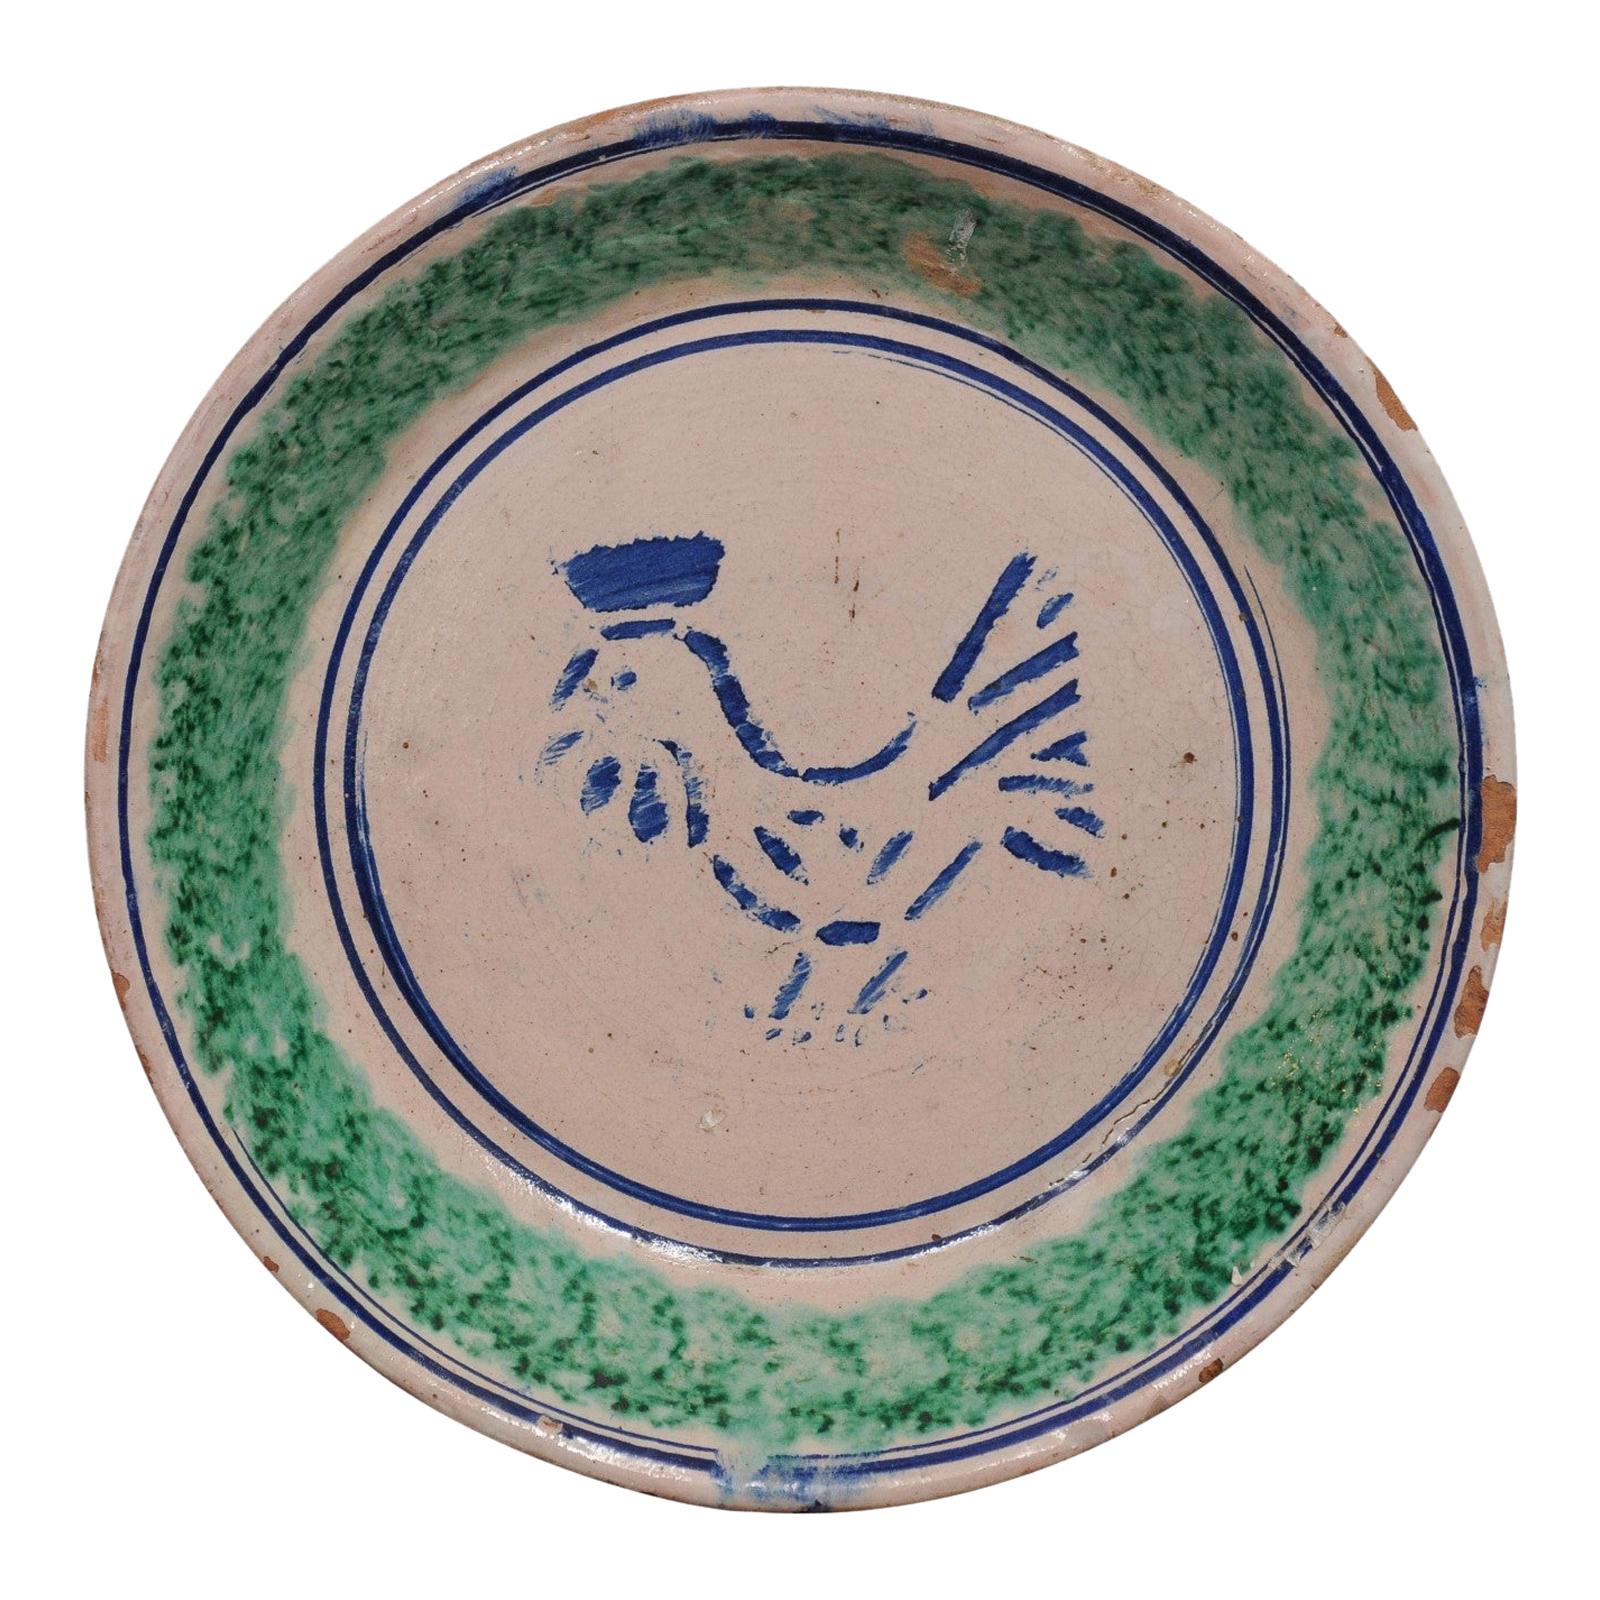 Italian 19th Century Pottery Plate with Blue Stylized Rooster and Green Accents